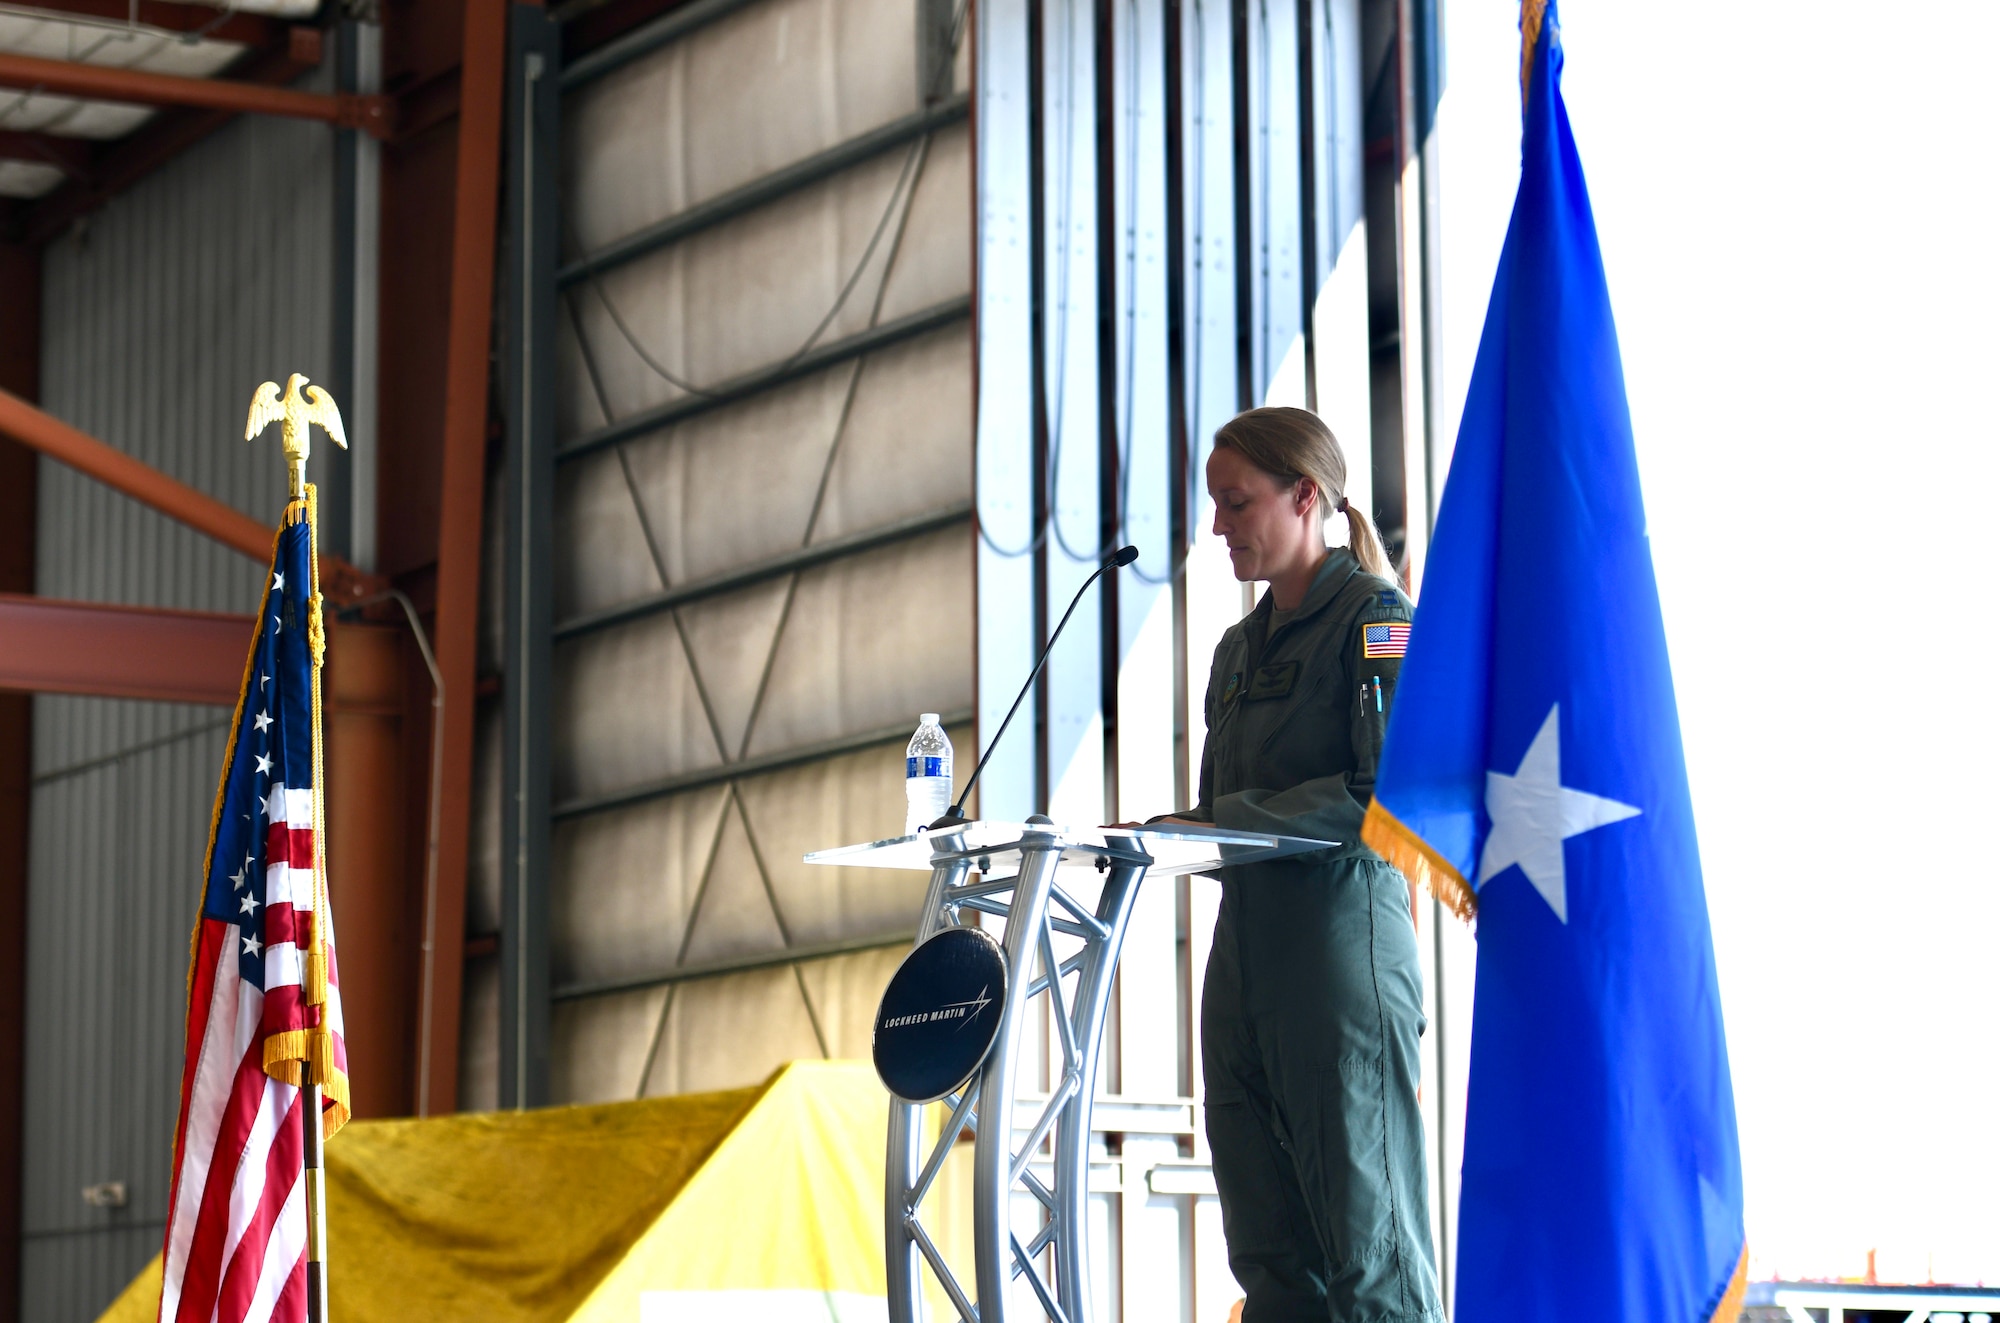 US Air Force Captain Tiedemann, 73rd Special Operations Squadron weapons system operator, provides remarks about the AC-130J Ghostrider at the dedication and delivery ceremony Nov. 2, 2022, at Bob Sikes Airport in Crestview, Florida. Tiedemann shared operational vignettes of the AC-130J during the event.